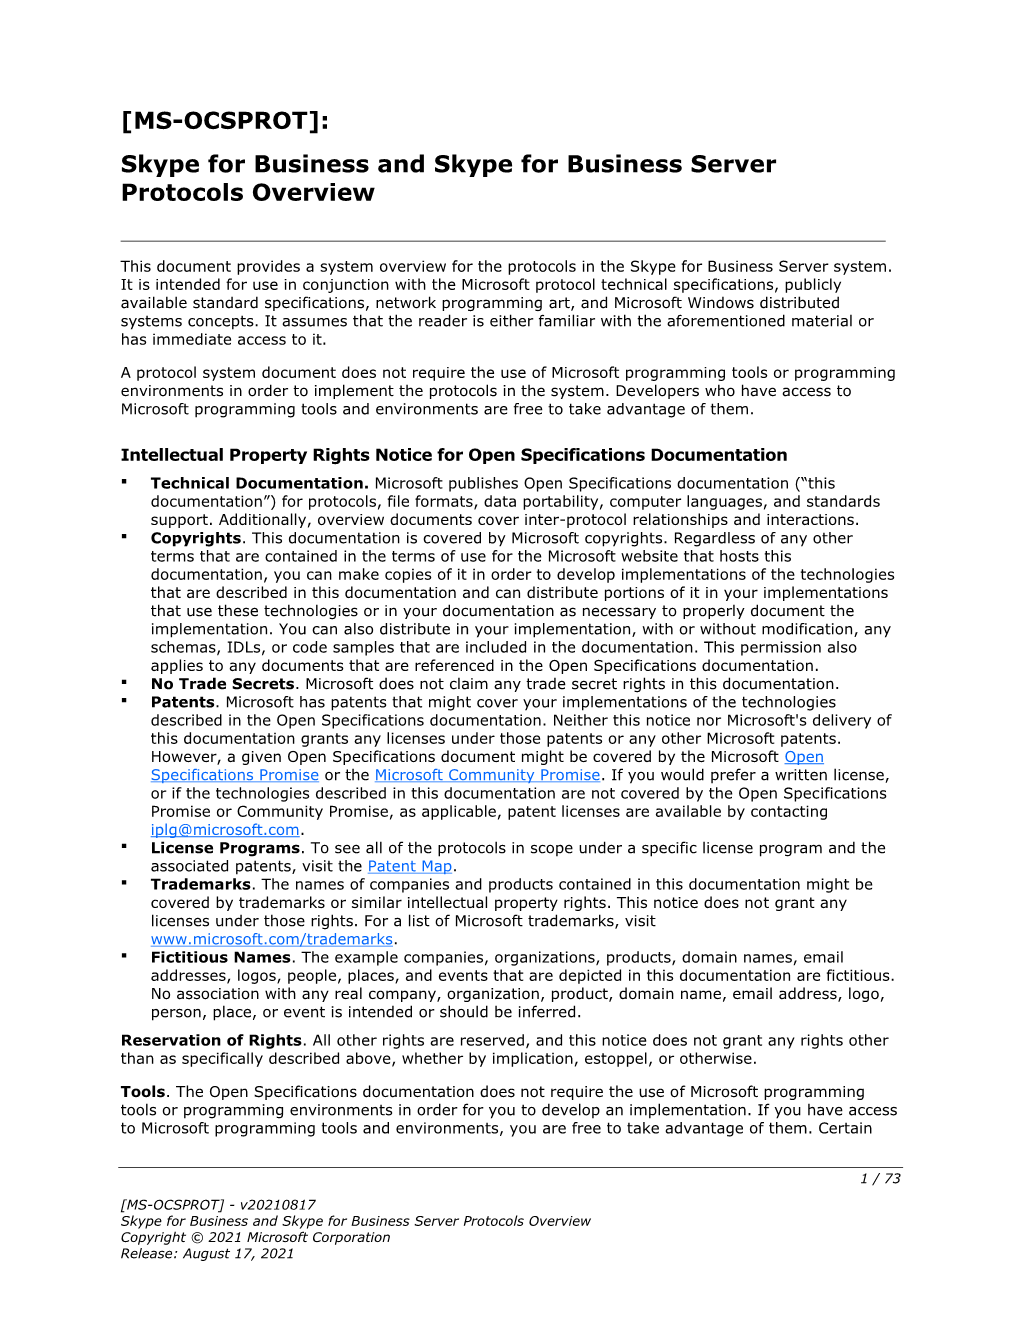 [MS-OCSPROT]: Skype for Business and Skype for Business Server Protocols Overview